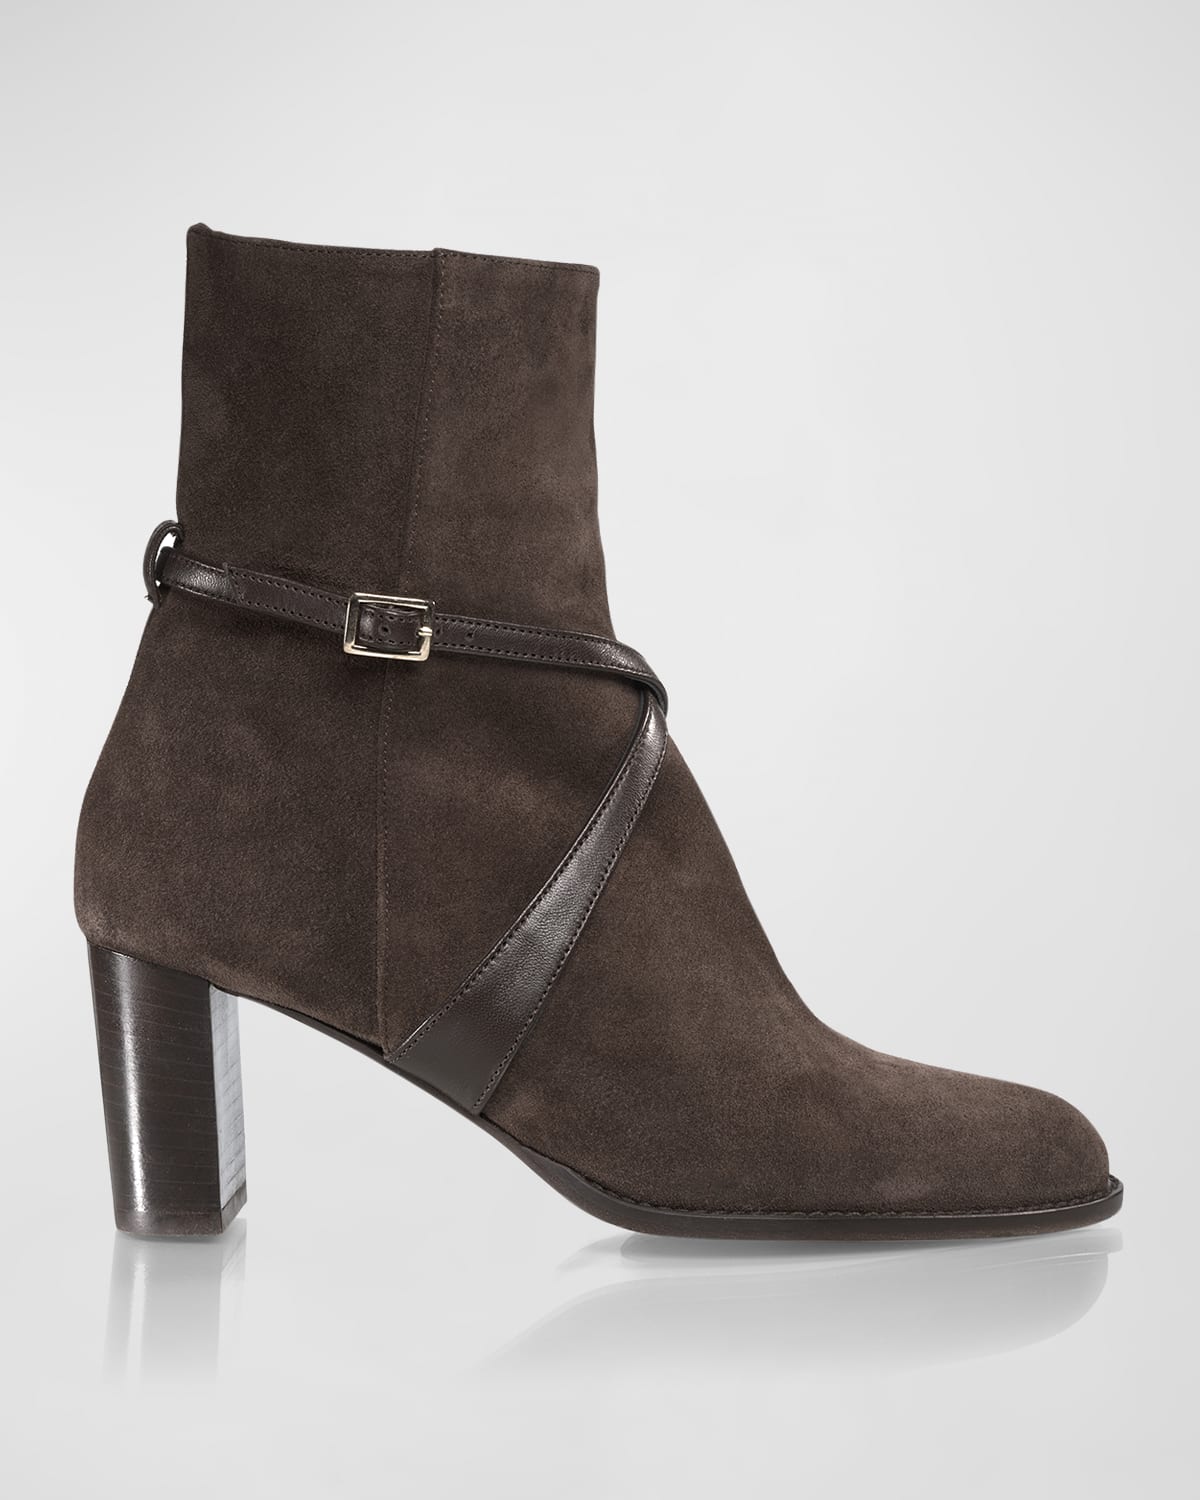 Selena Suede Ankle-Strap Booties